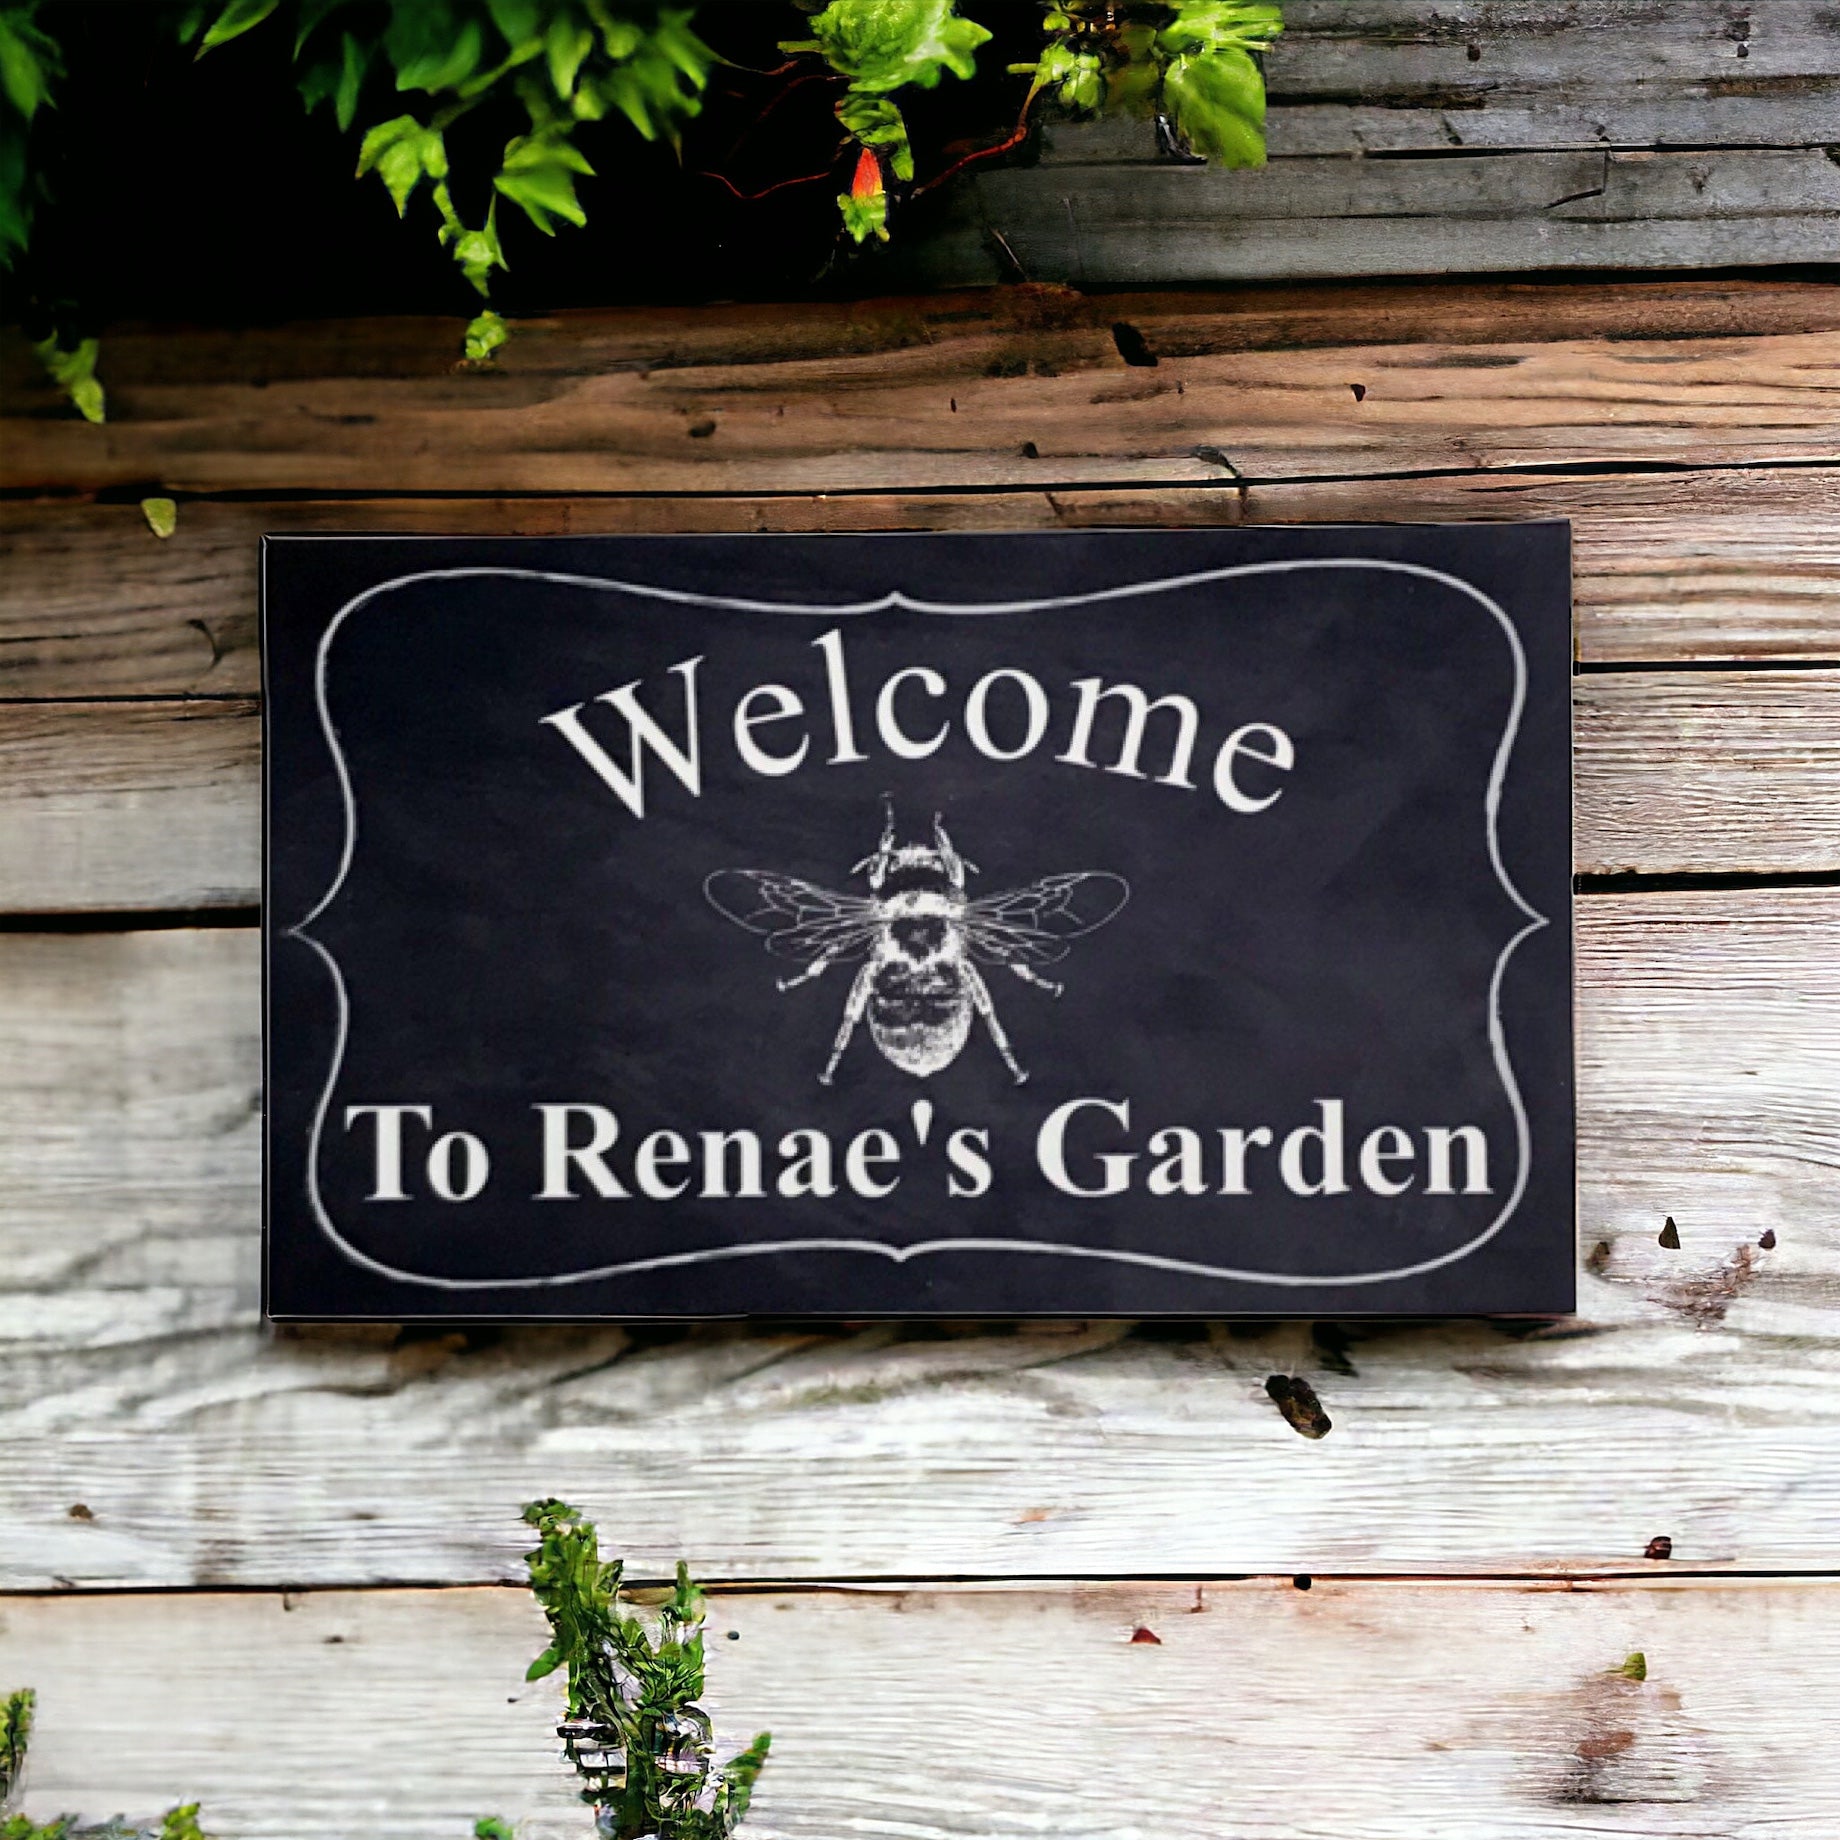 Welcome Personalised Custom Garden Bee Sign - The Renmy Store Homewares & Gifts 